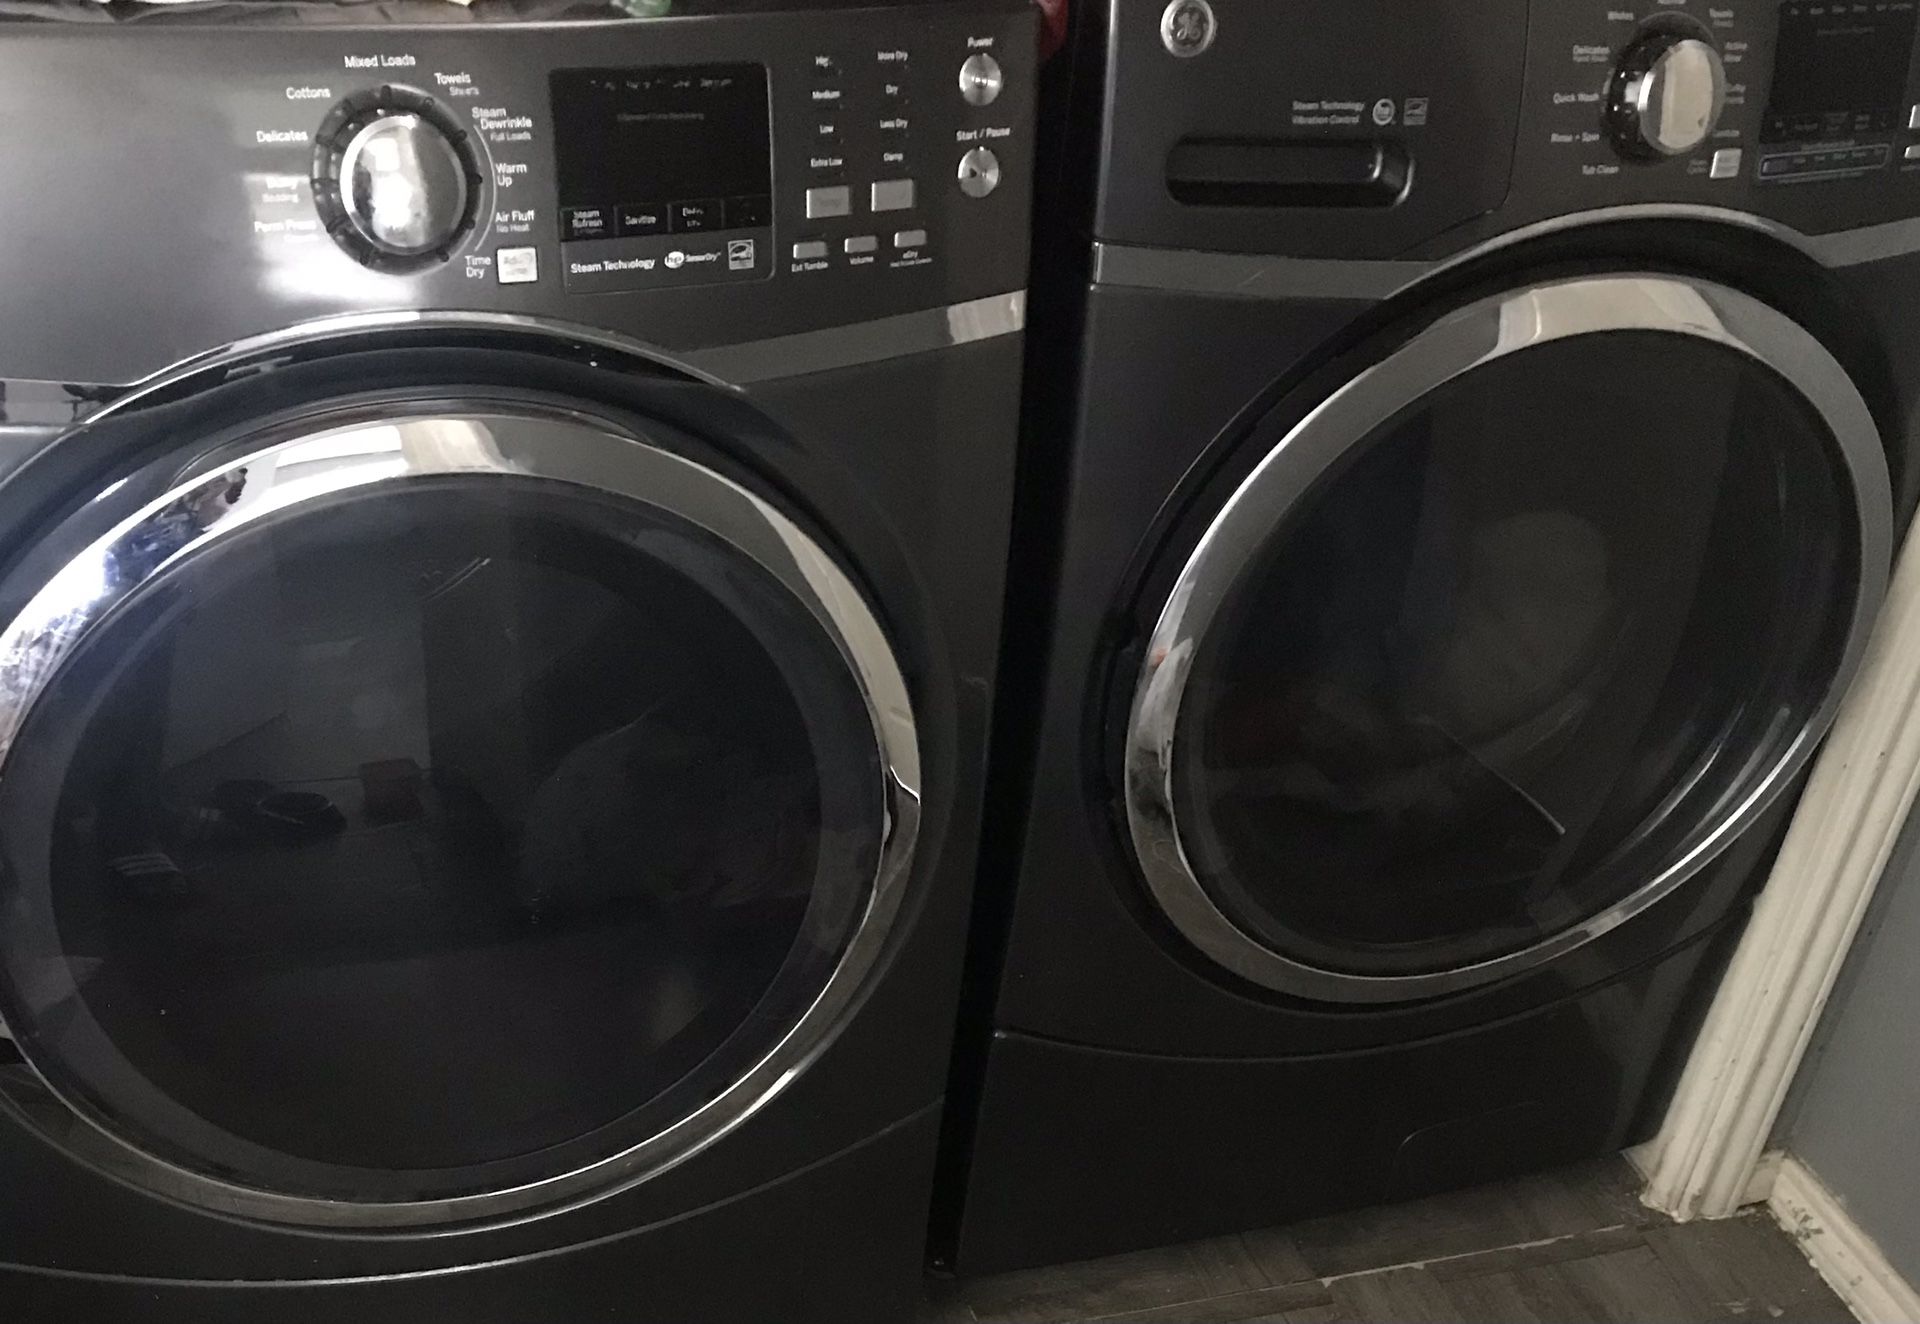 GE General Electric Washer And Dryer Combo (Electric Dryer)